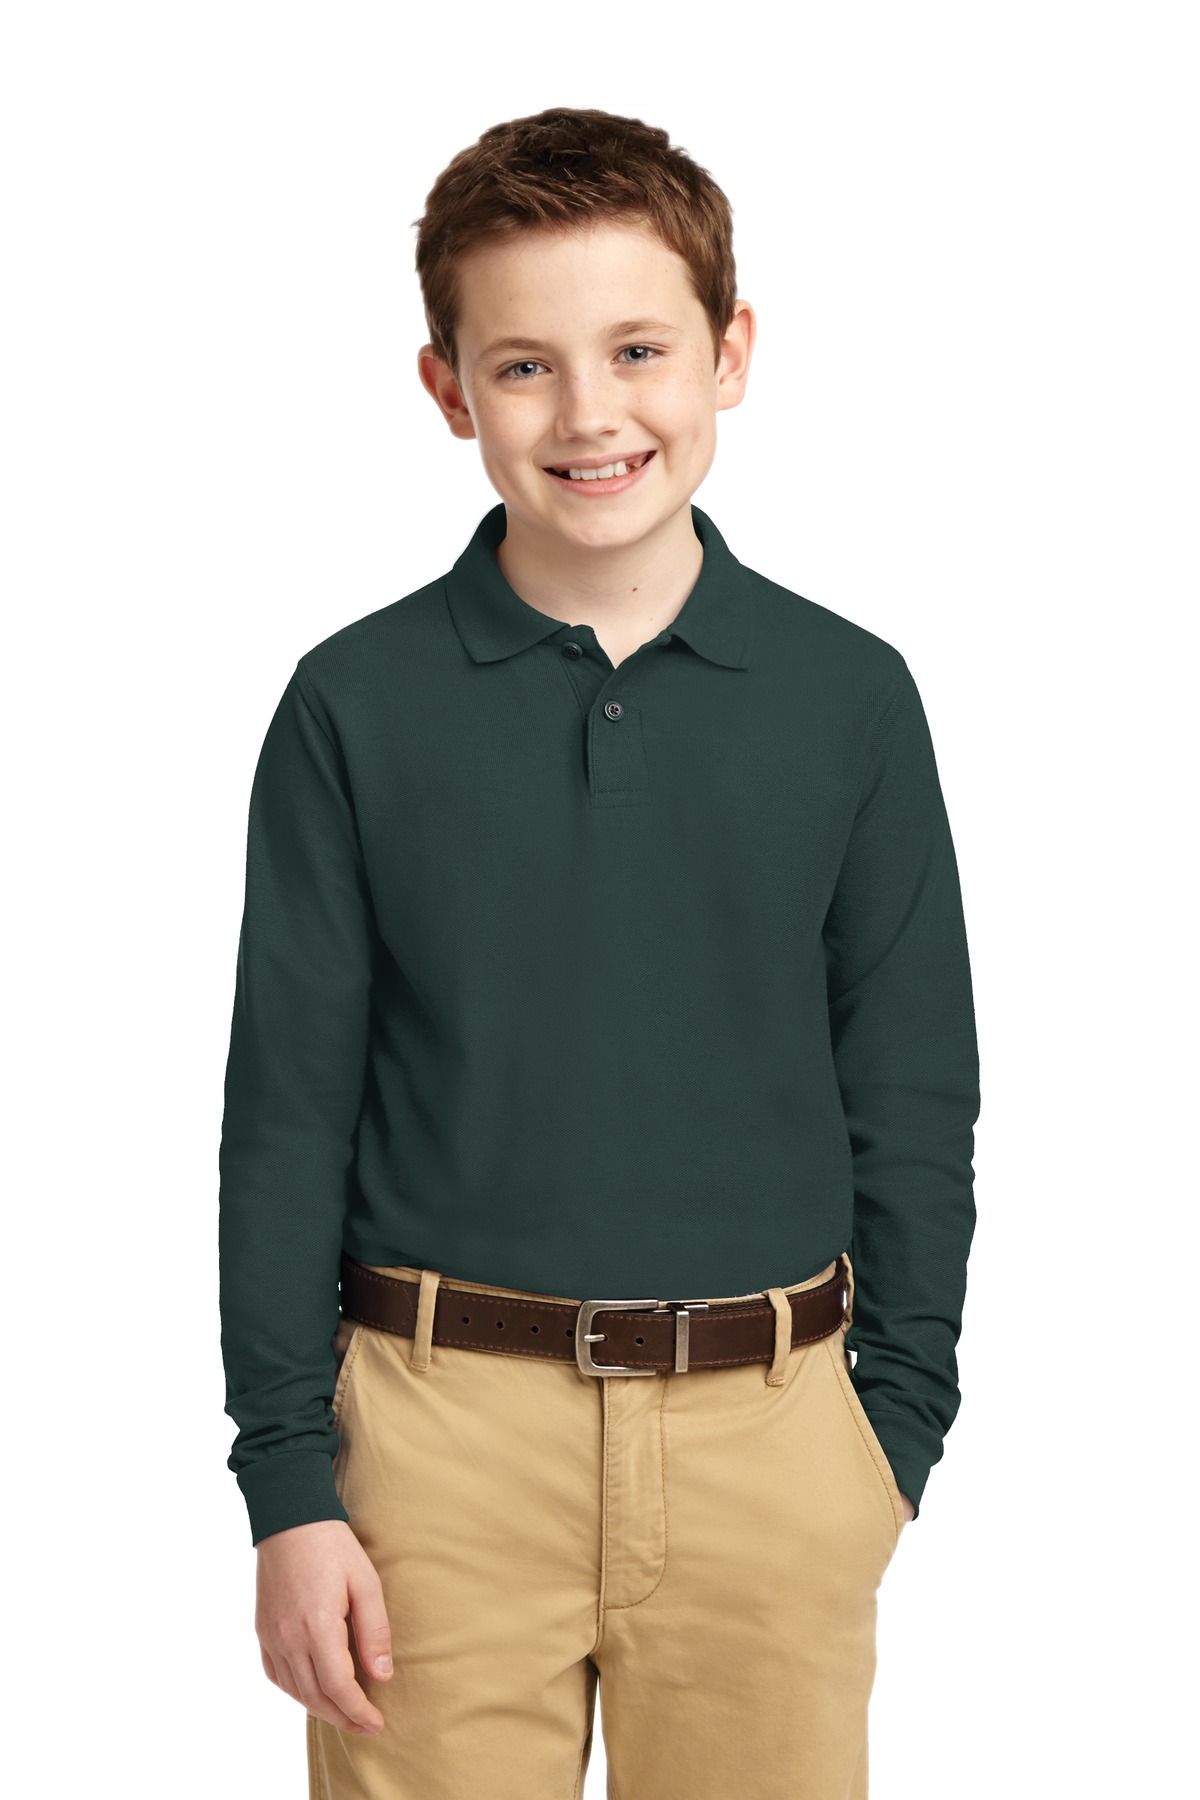 Y500LS NEW Youth Long Sleeve Silk Touch Polo